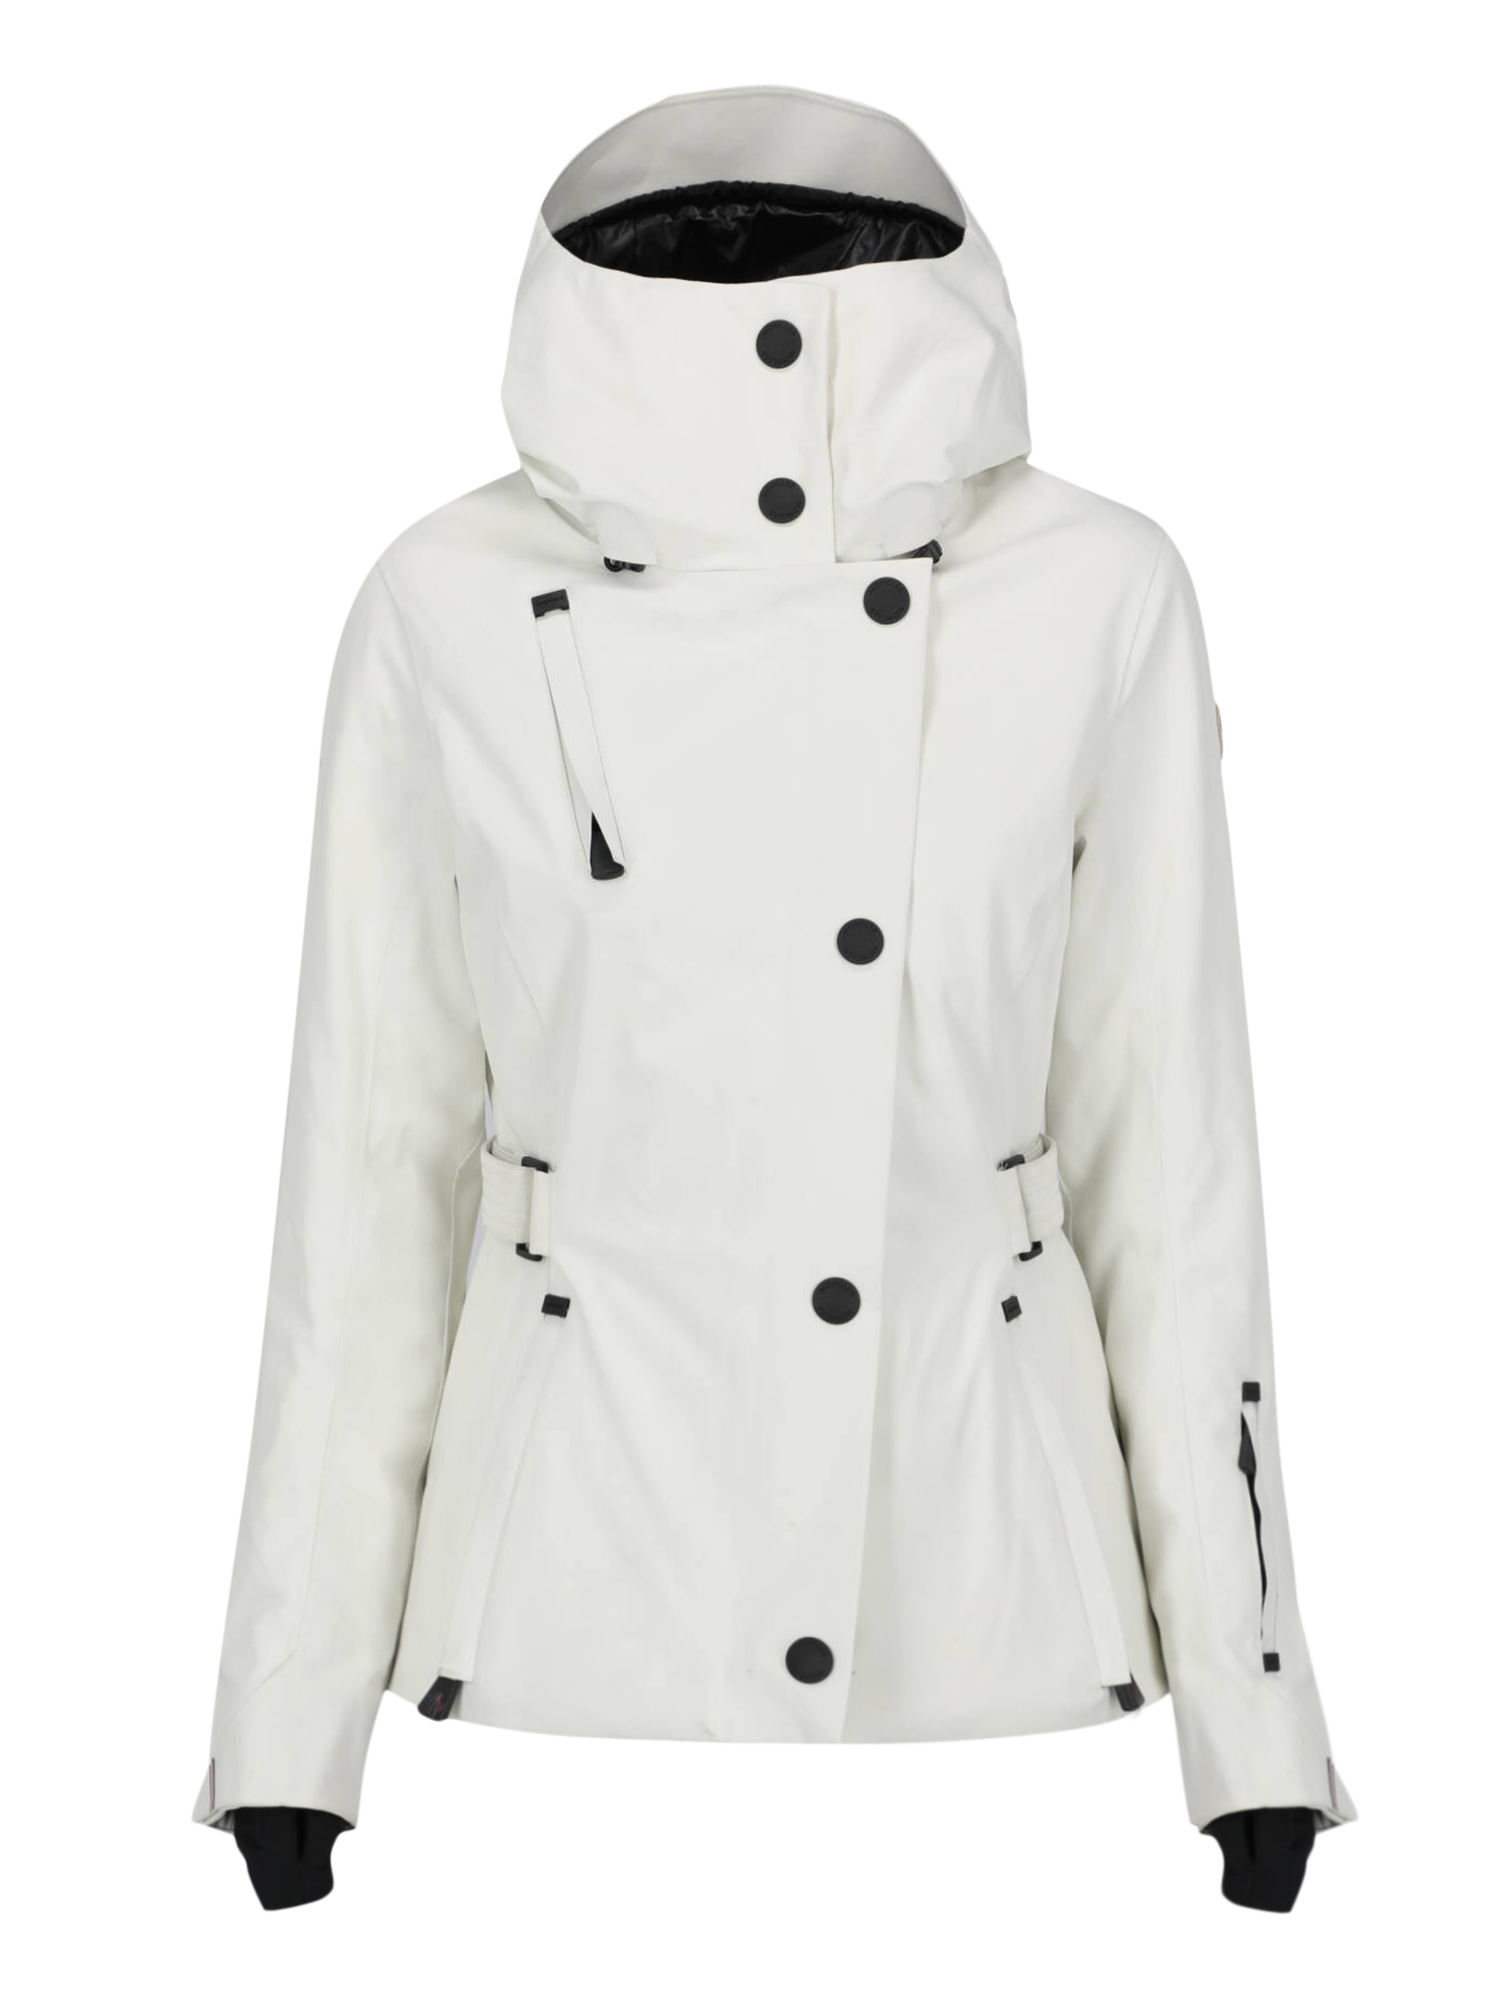 Pre-owned Moncler Women's Outwear -  - In White S